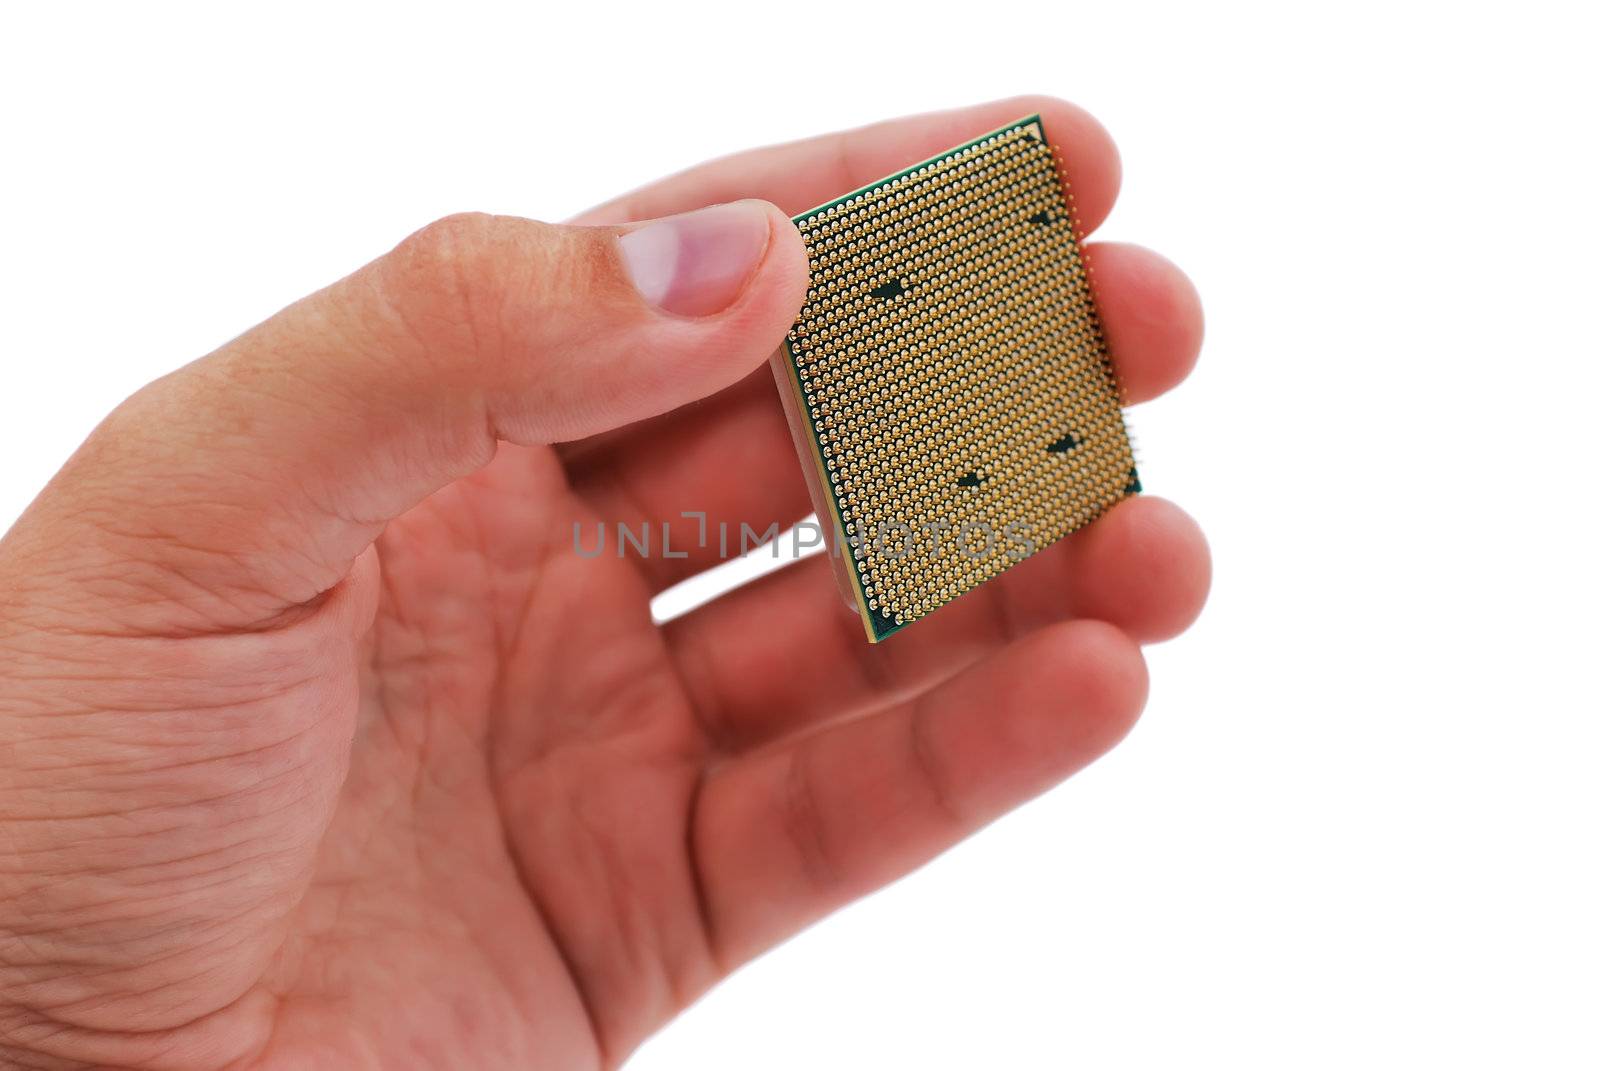 processor in hand on a white background